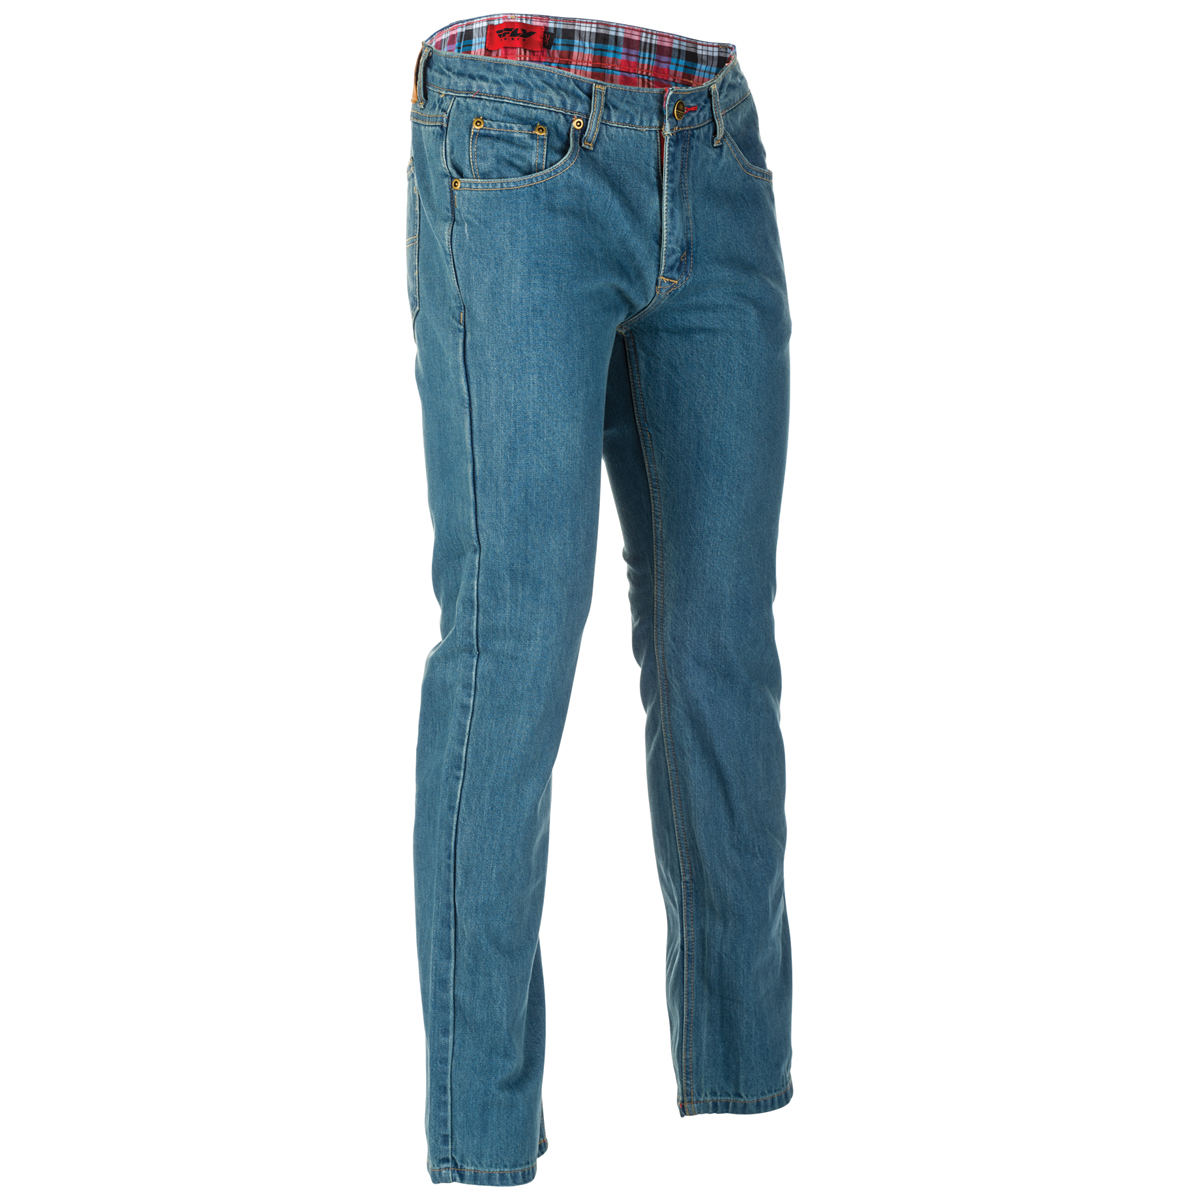 FLY Racing Street Men's Resistance Blue Riding Jeans